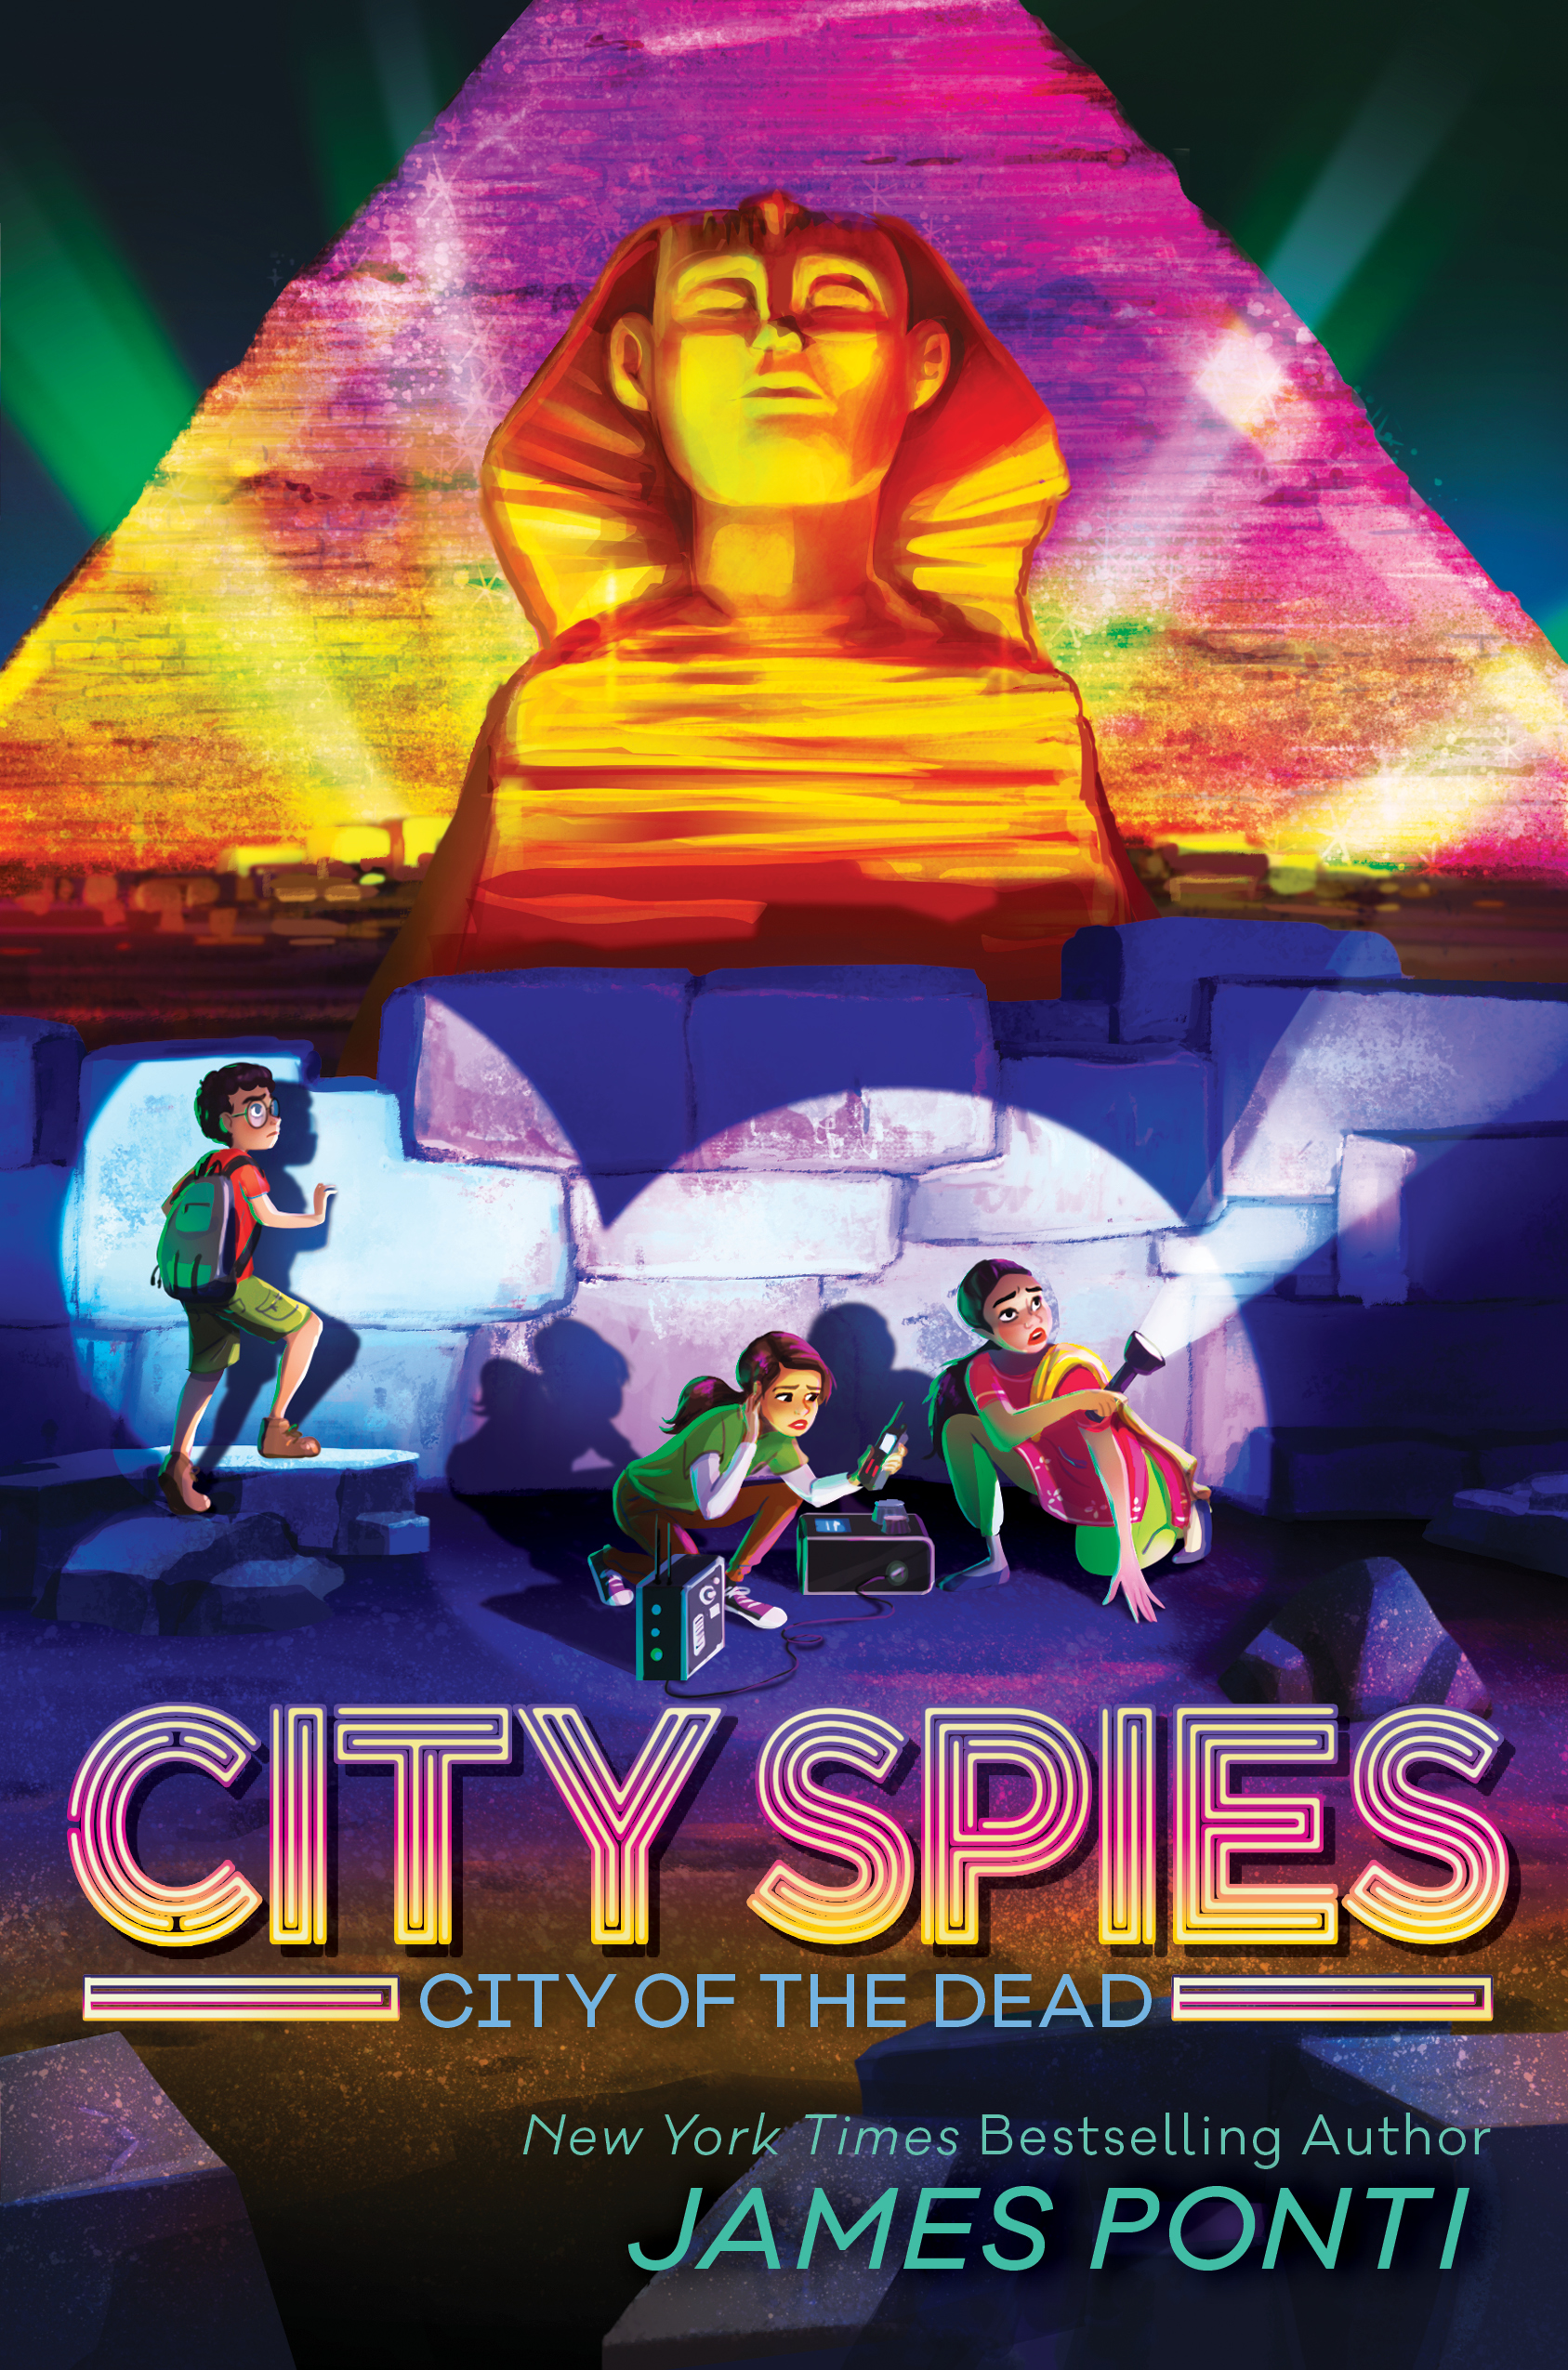 Author Chat With James Ponti (City Spies: City of the Dead), Plus Giveaway! ~ US Only, No P.O Boxes!